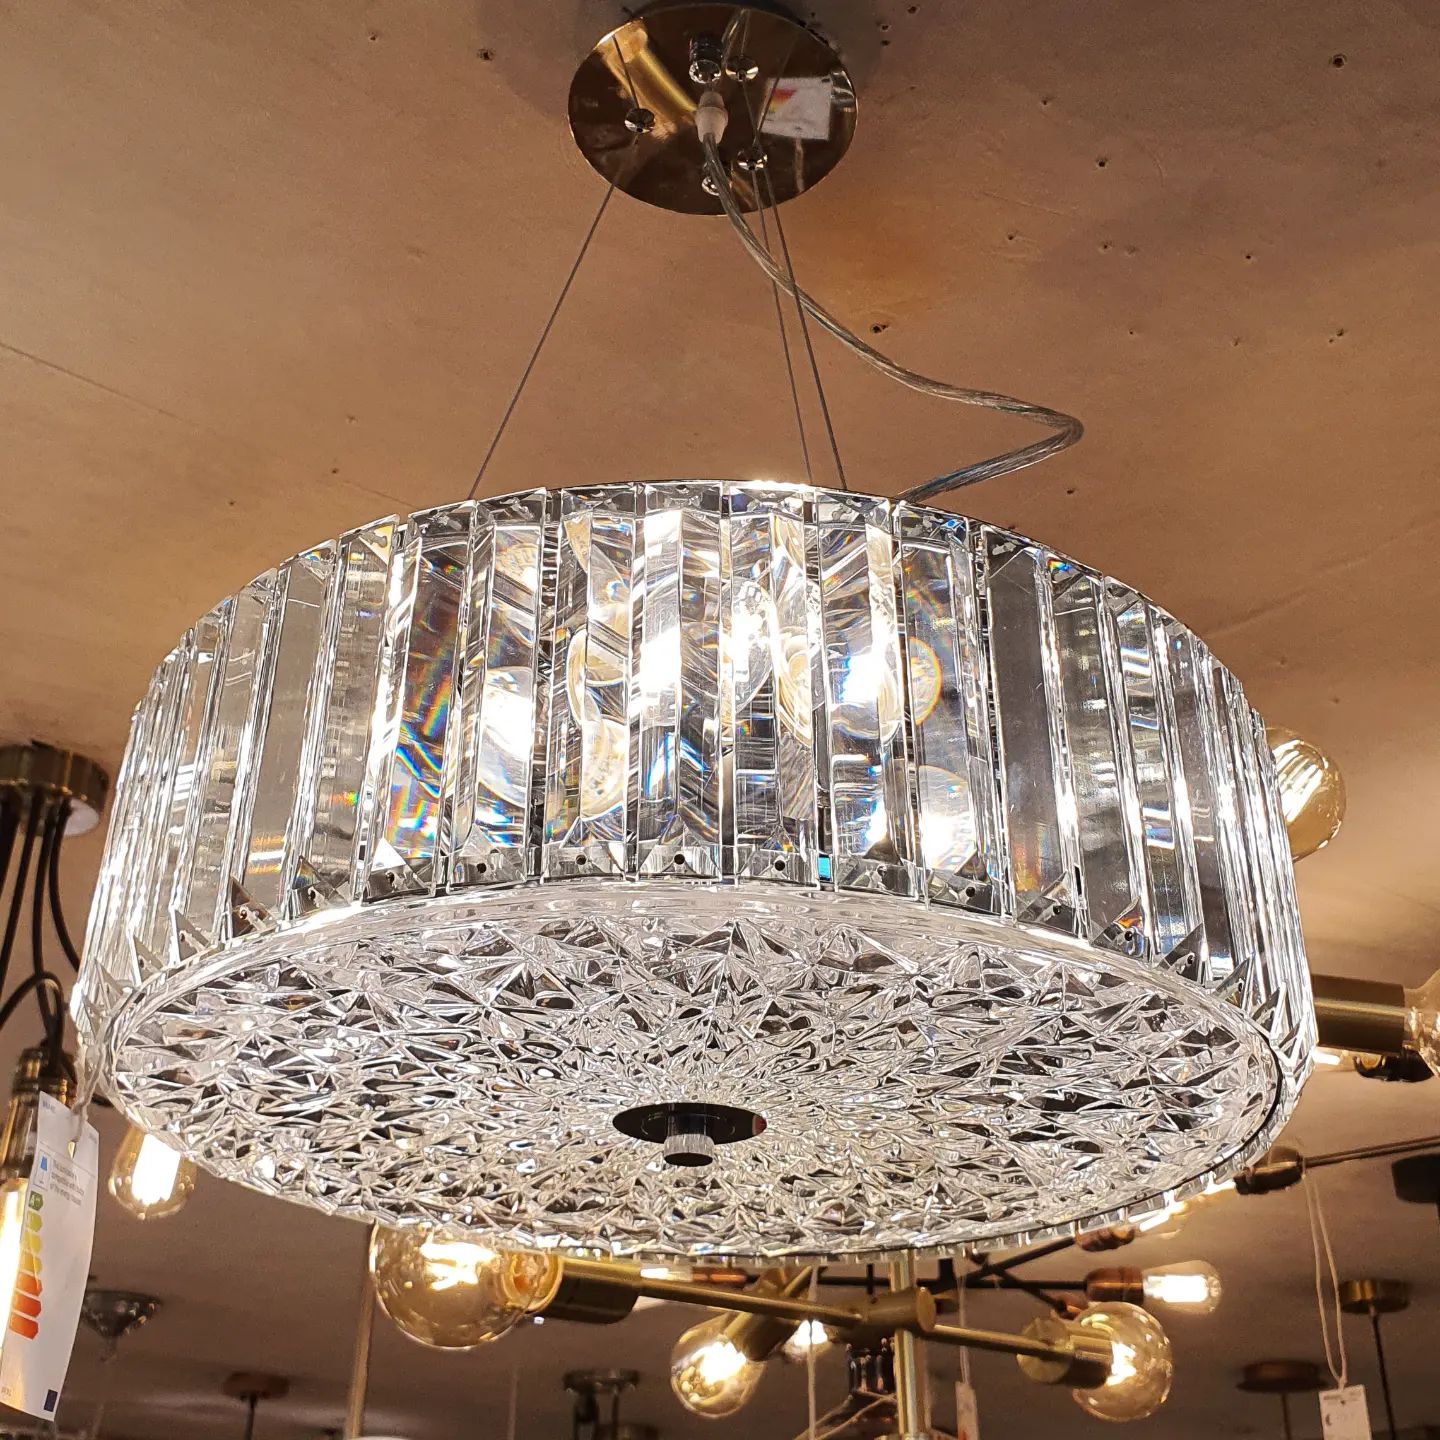 This 6 light crystal pendant takes the traditional crystal and updates it with beautiful sparkling faceted crystal mounted in a chrome frame with a decorative clear glass diffuser. This stunning design will be a striking display for modern or traditional decors. This pendant is fully height adjustable at the point of installation. 💡

Available today in-store.